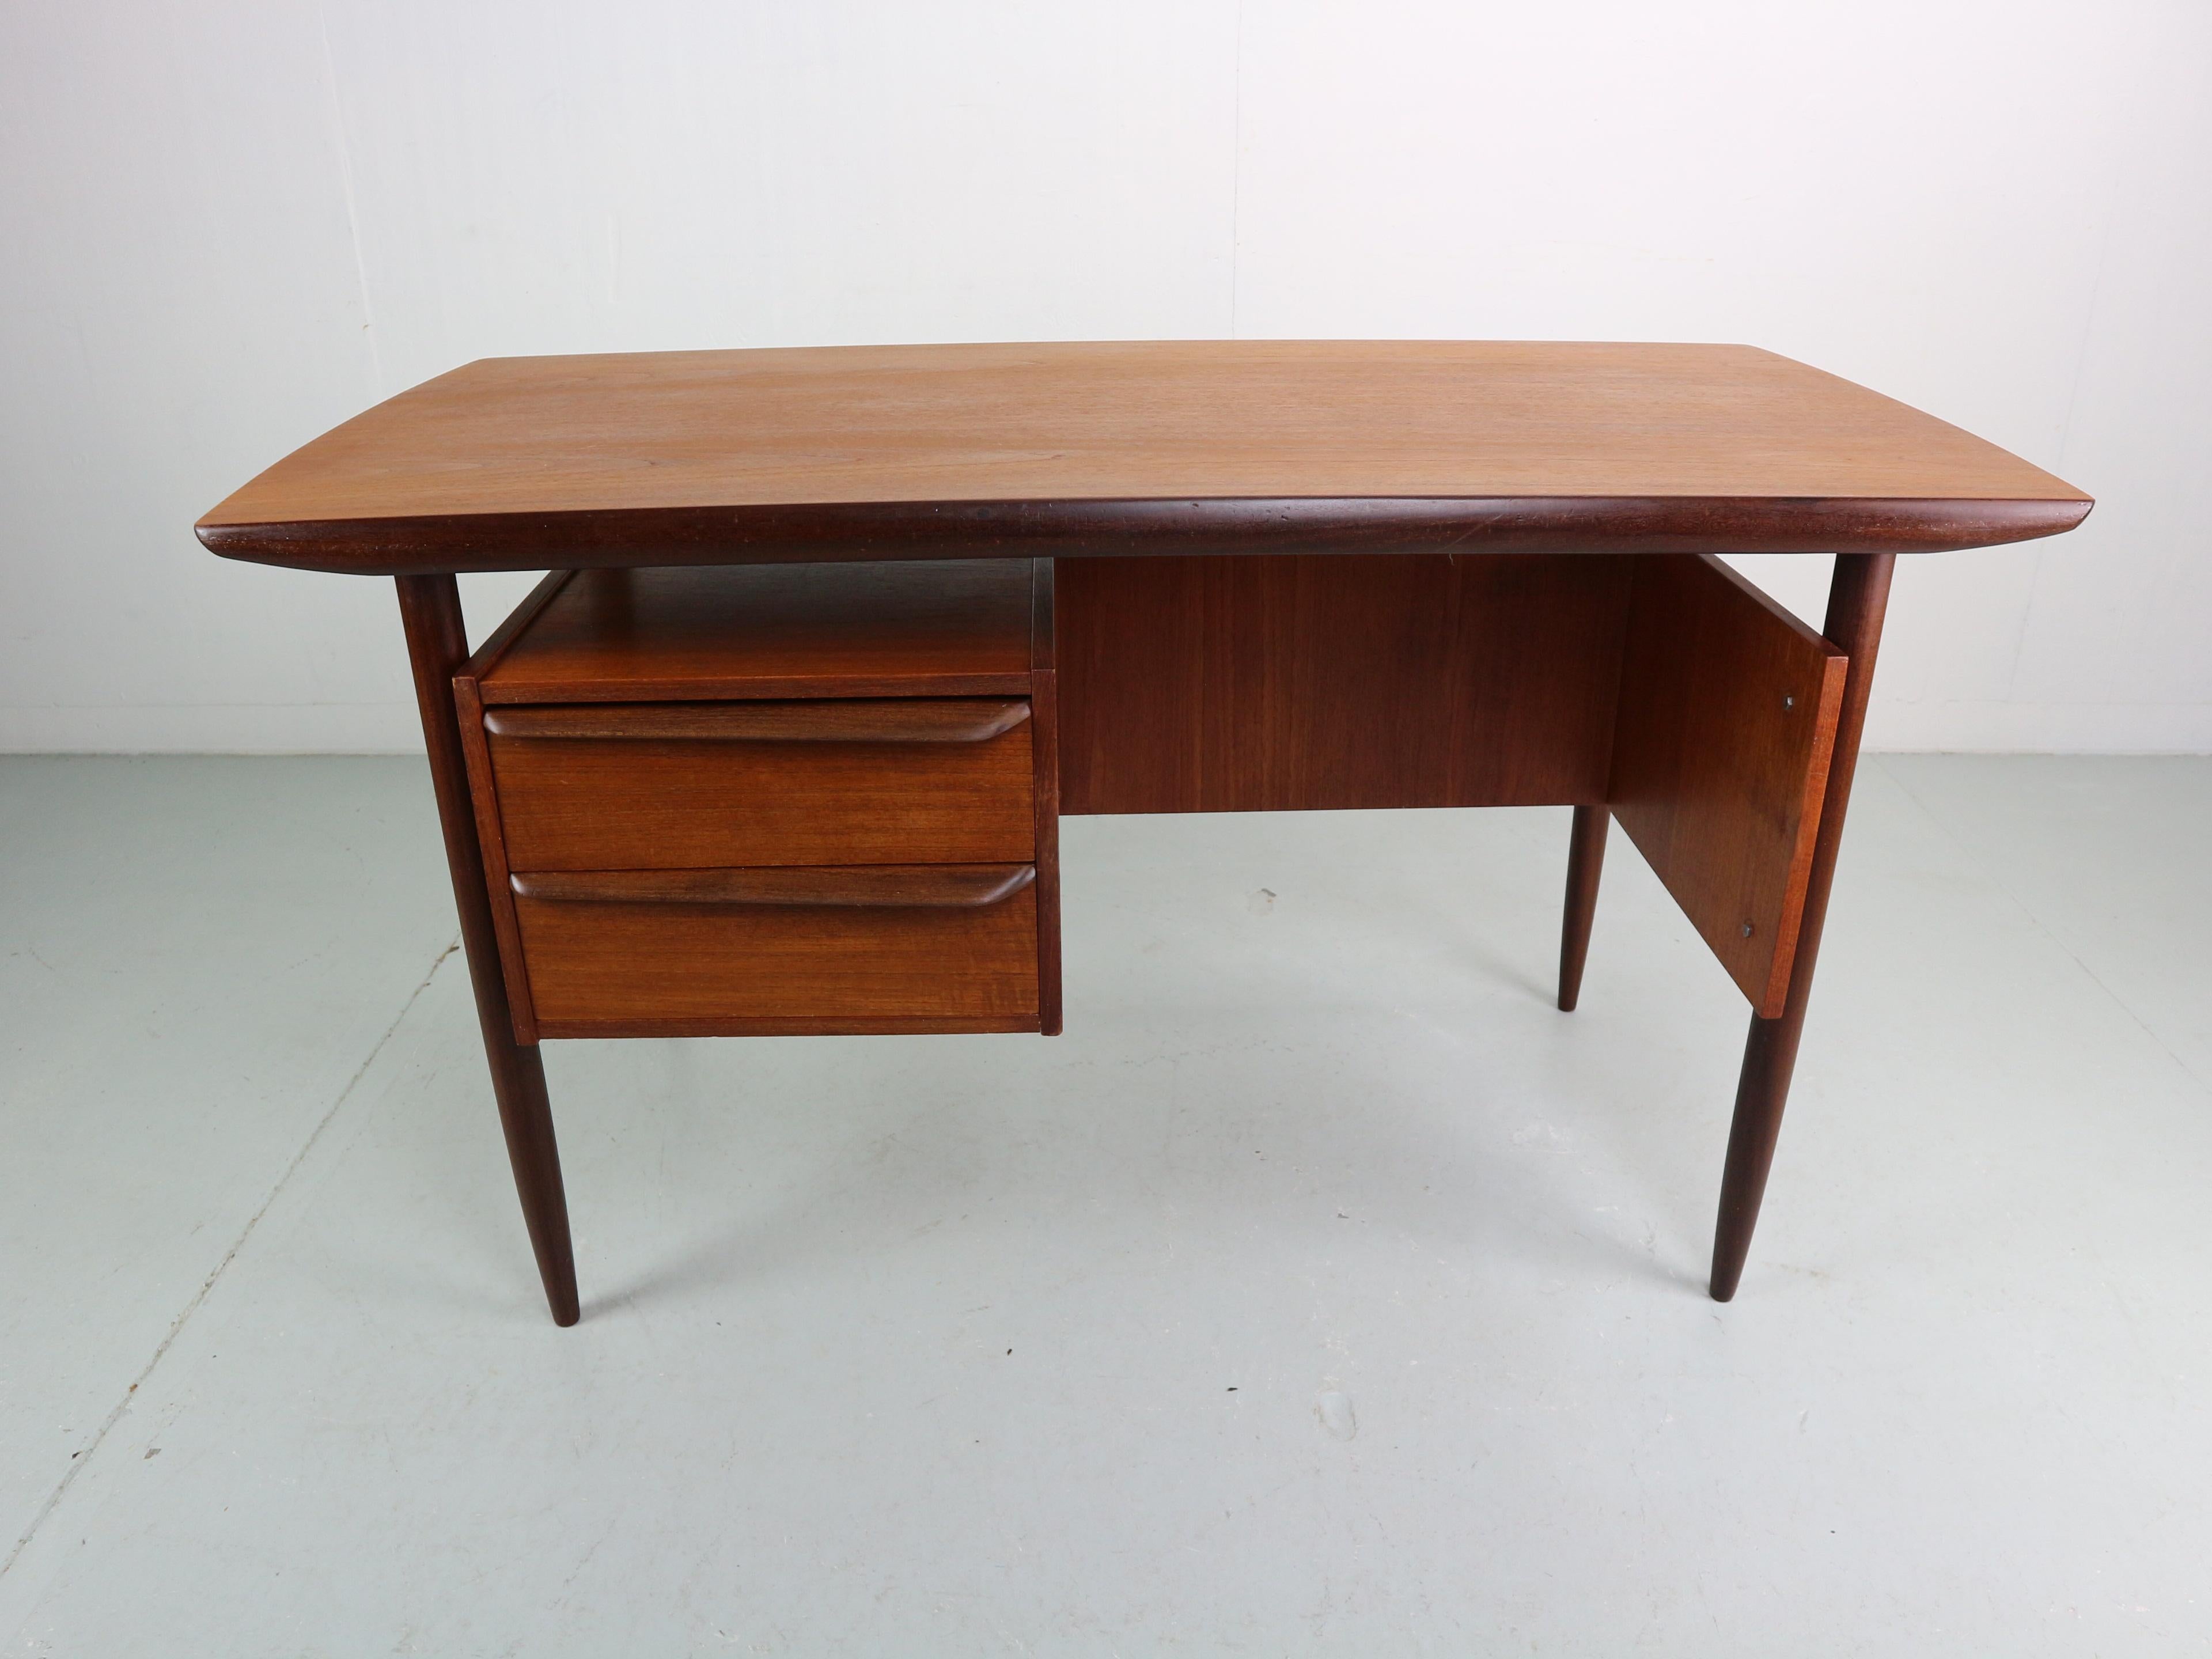 Teak writing desk produced by Hulmefa in the 1960s and designed by Tijsseling, Netherlands. The desk has two drawers. There’s a book shelve at the back for storage or display. The desk is in a good condition.